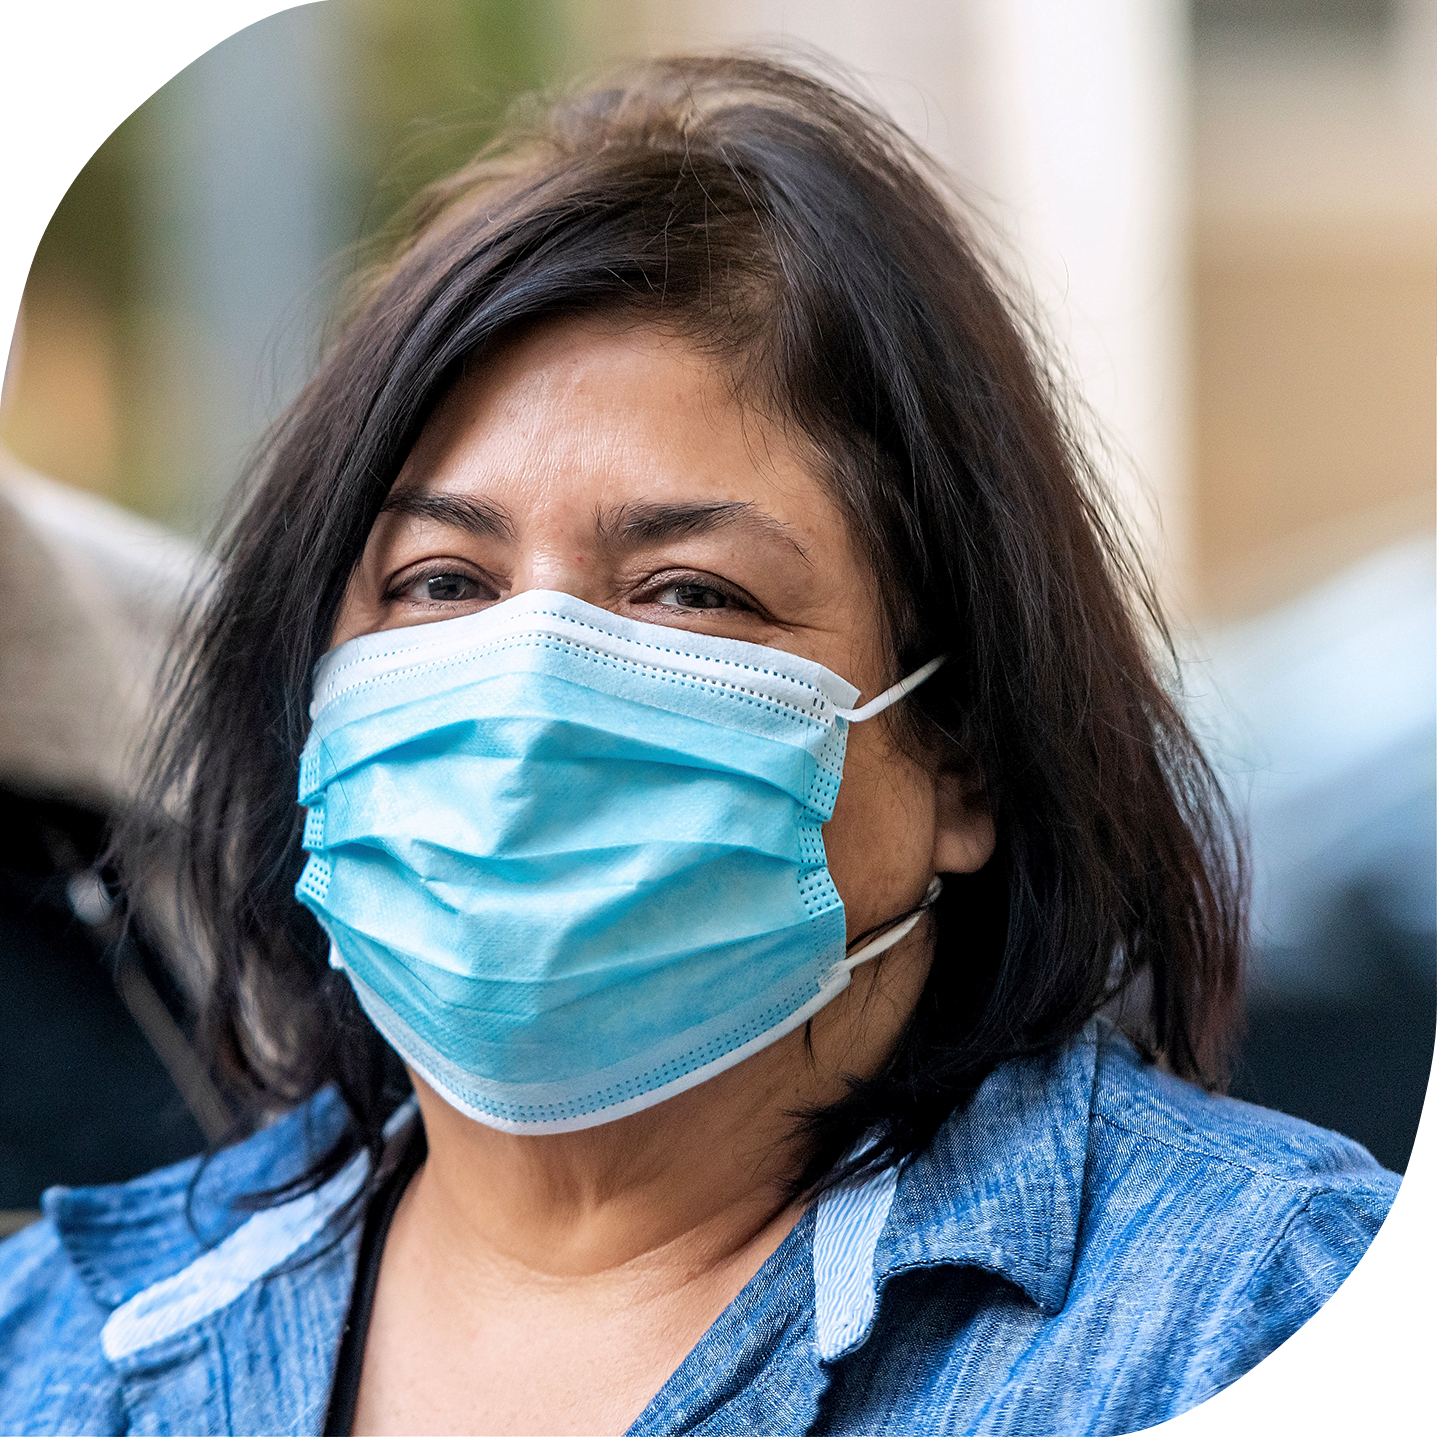 A middle-aged Asian woman wearing a light blue medical mask is looking into the camera.